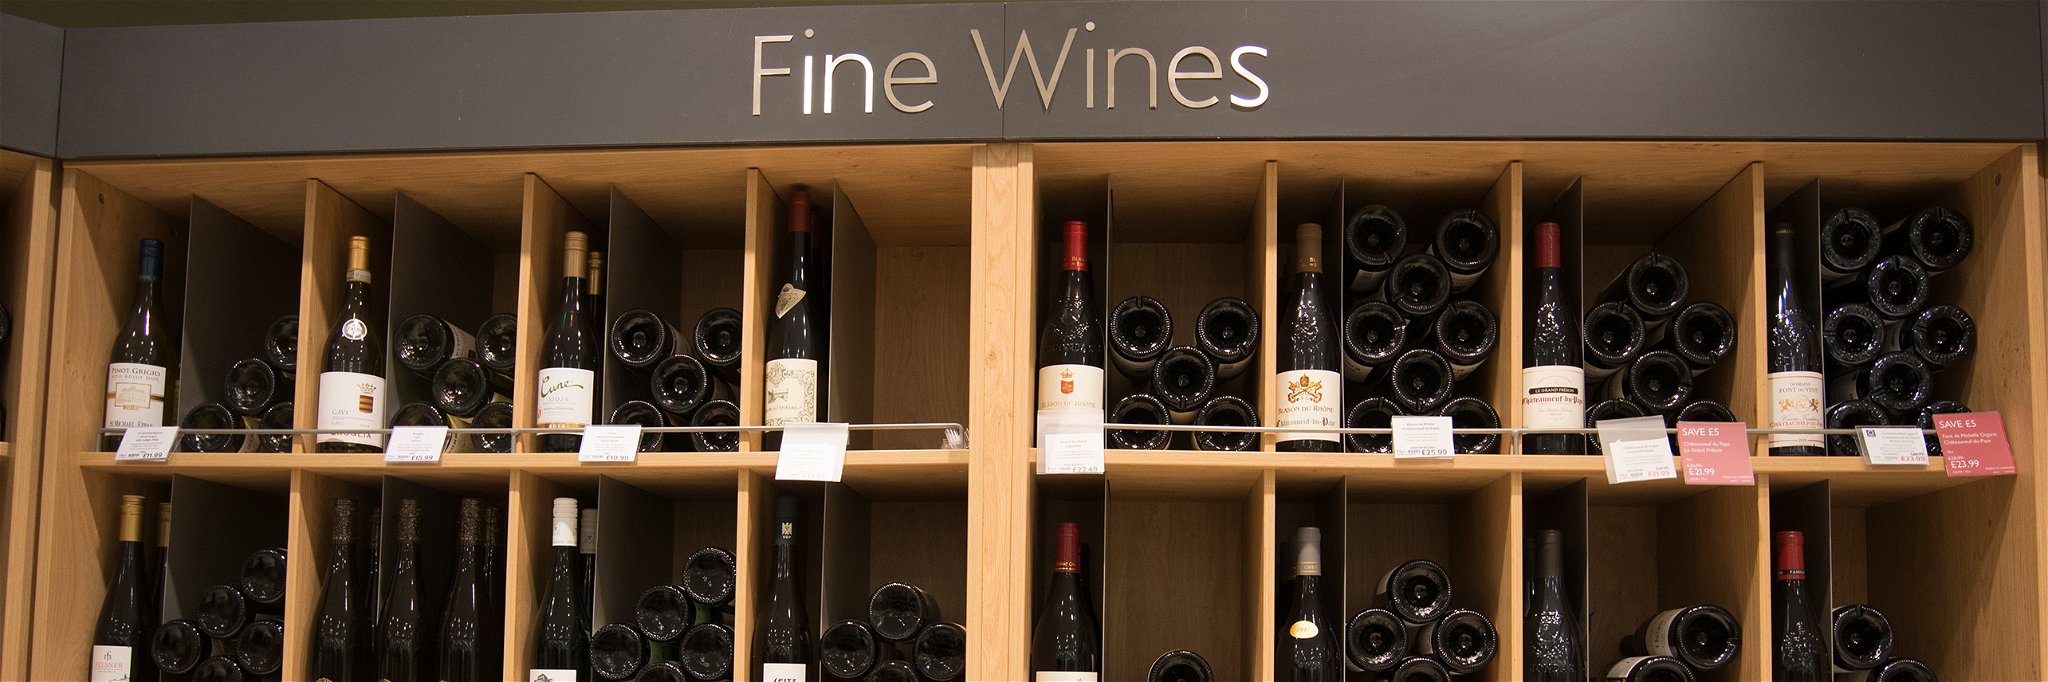 Wines for sale at Waitrose